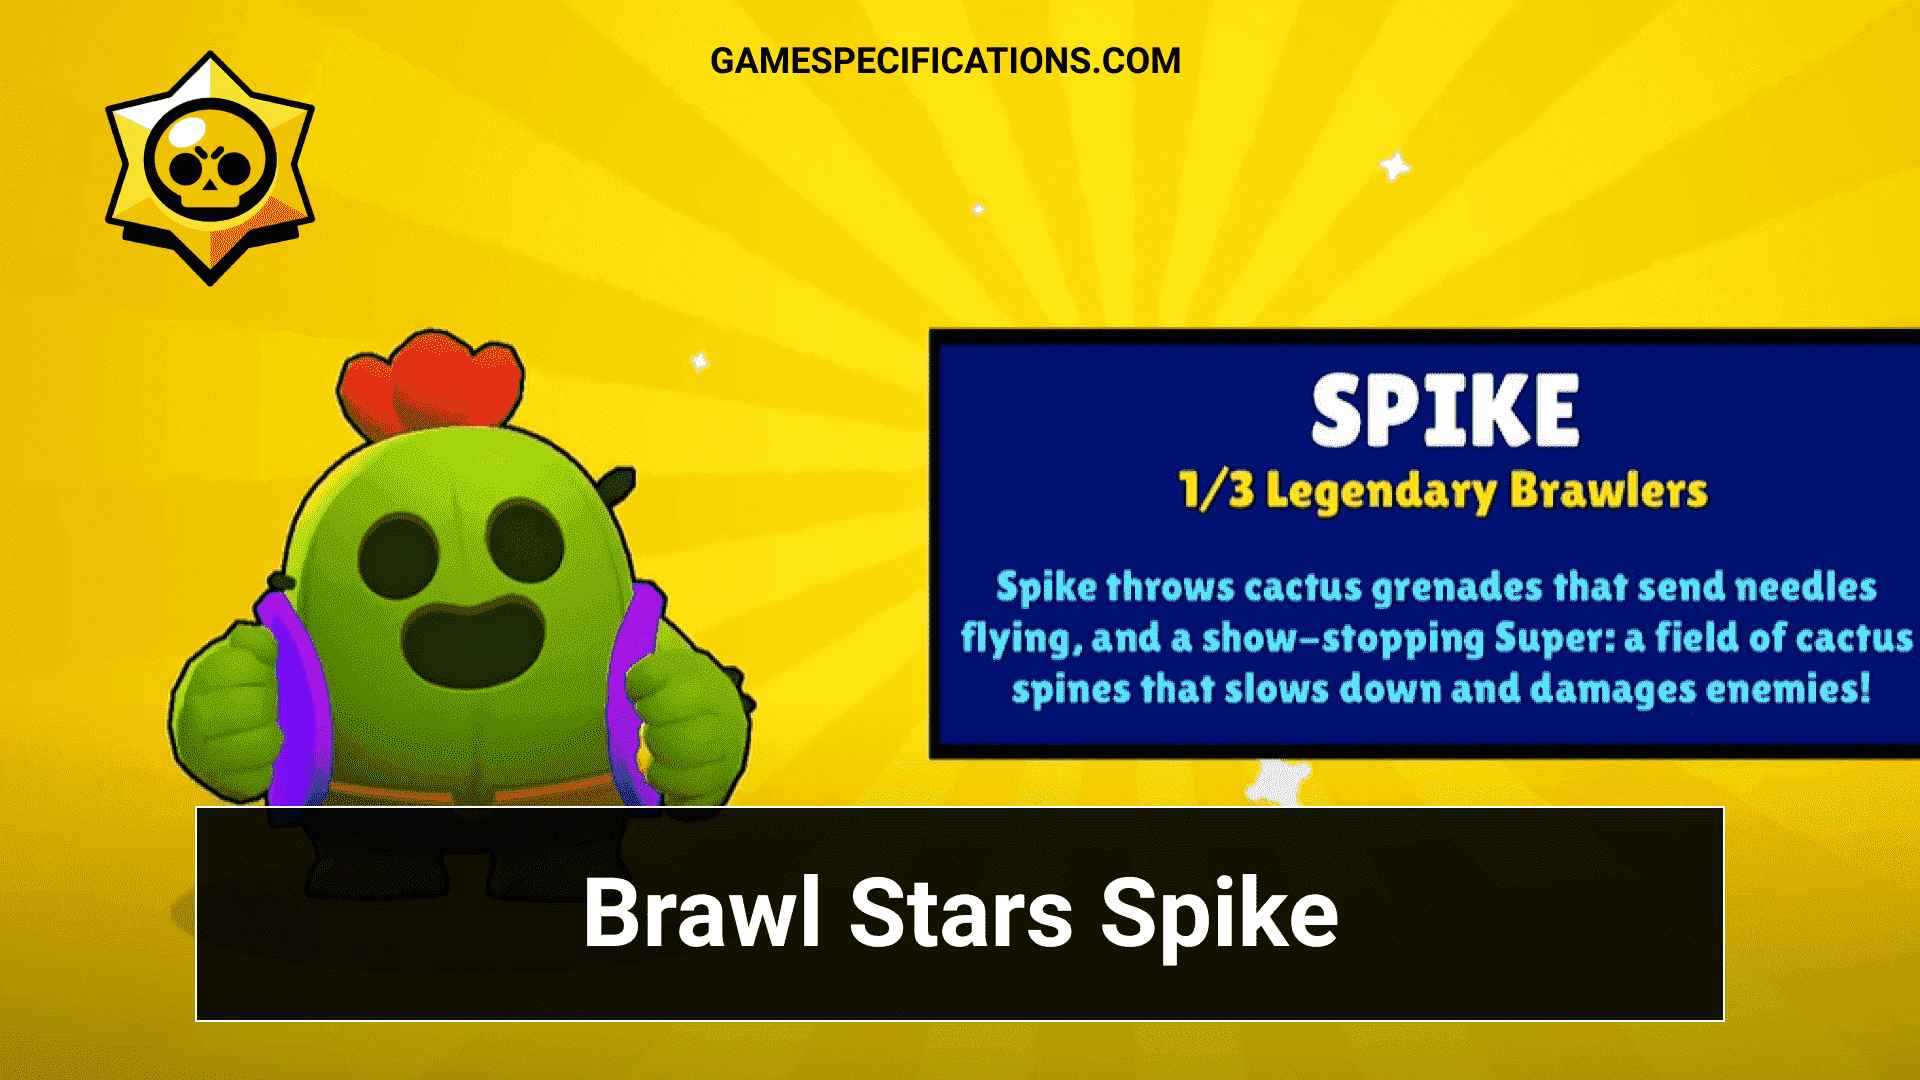 Brawl Stars Spike Introducing The Legendary Character In The Game Game Specifications - crow legendary brawlers brawl stars wallpaper